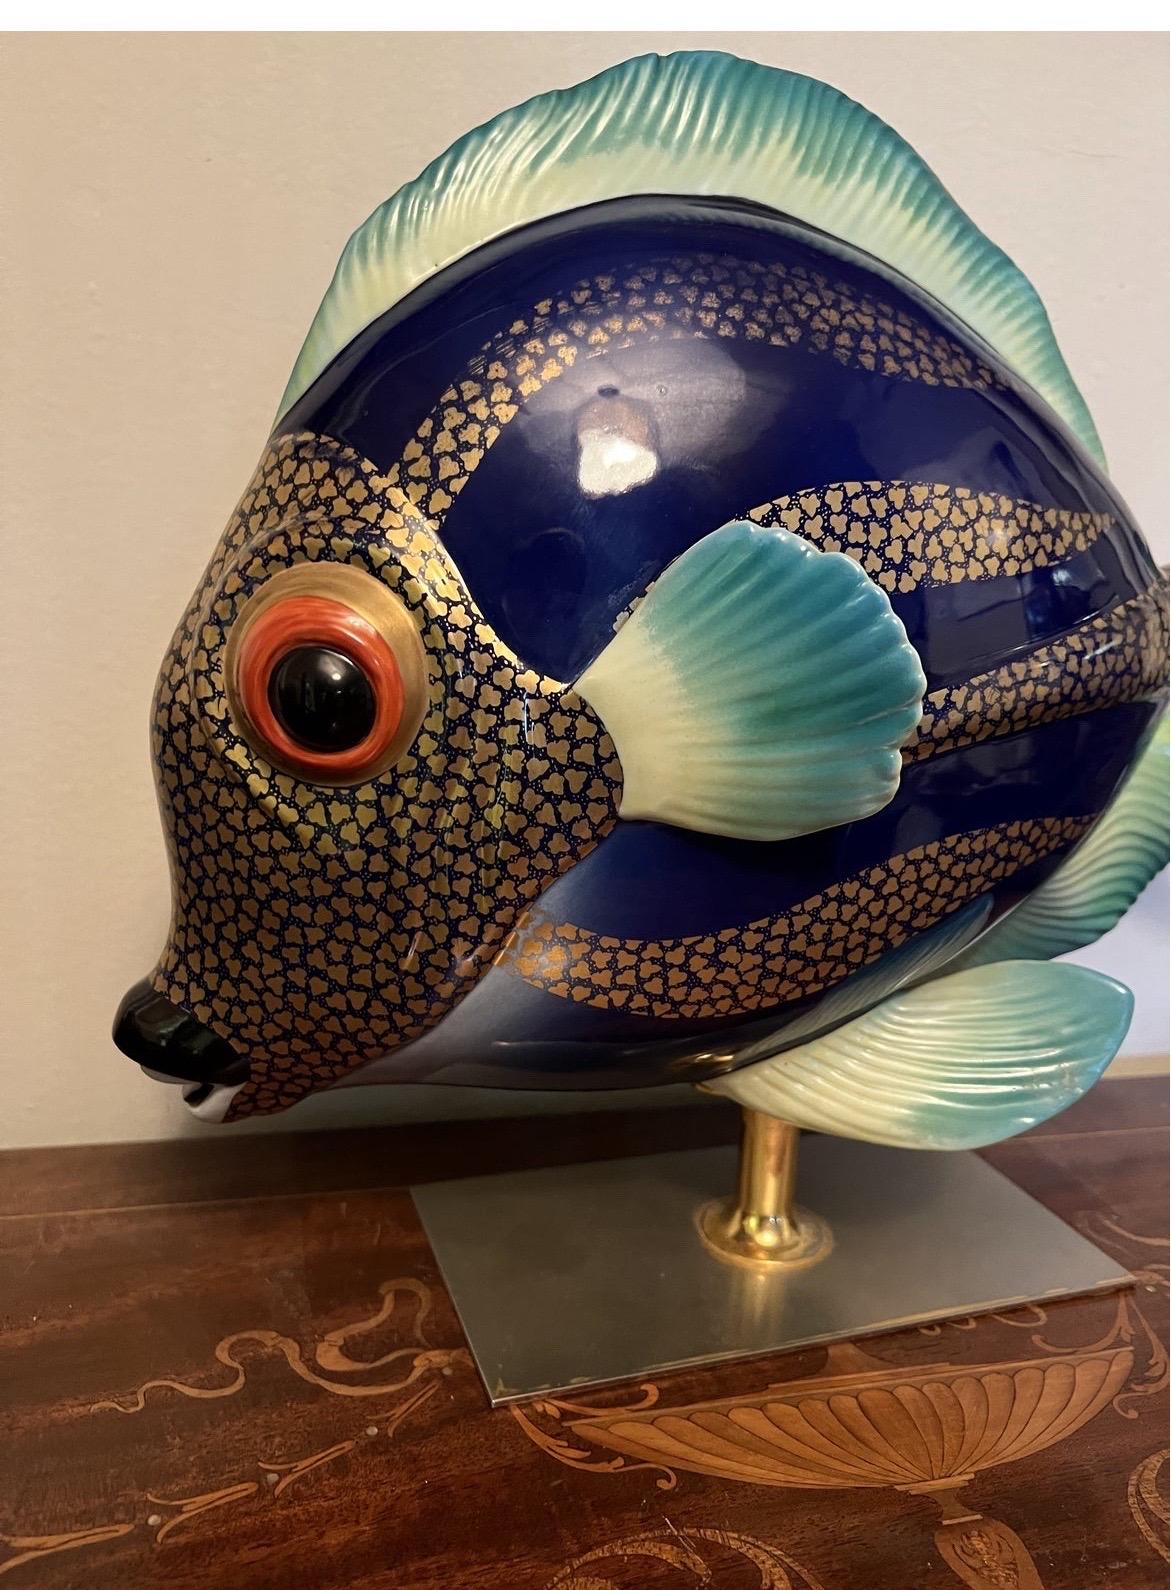 A vintage hand painted porcelain fish sculpture by Oggetti. Superb detail and real life size! 
This porcelain “Mangani” fish is decorated with gilt details, hand painted body and mounted to a custom brass base / stand.